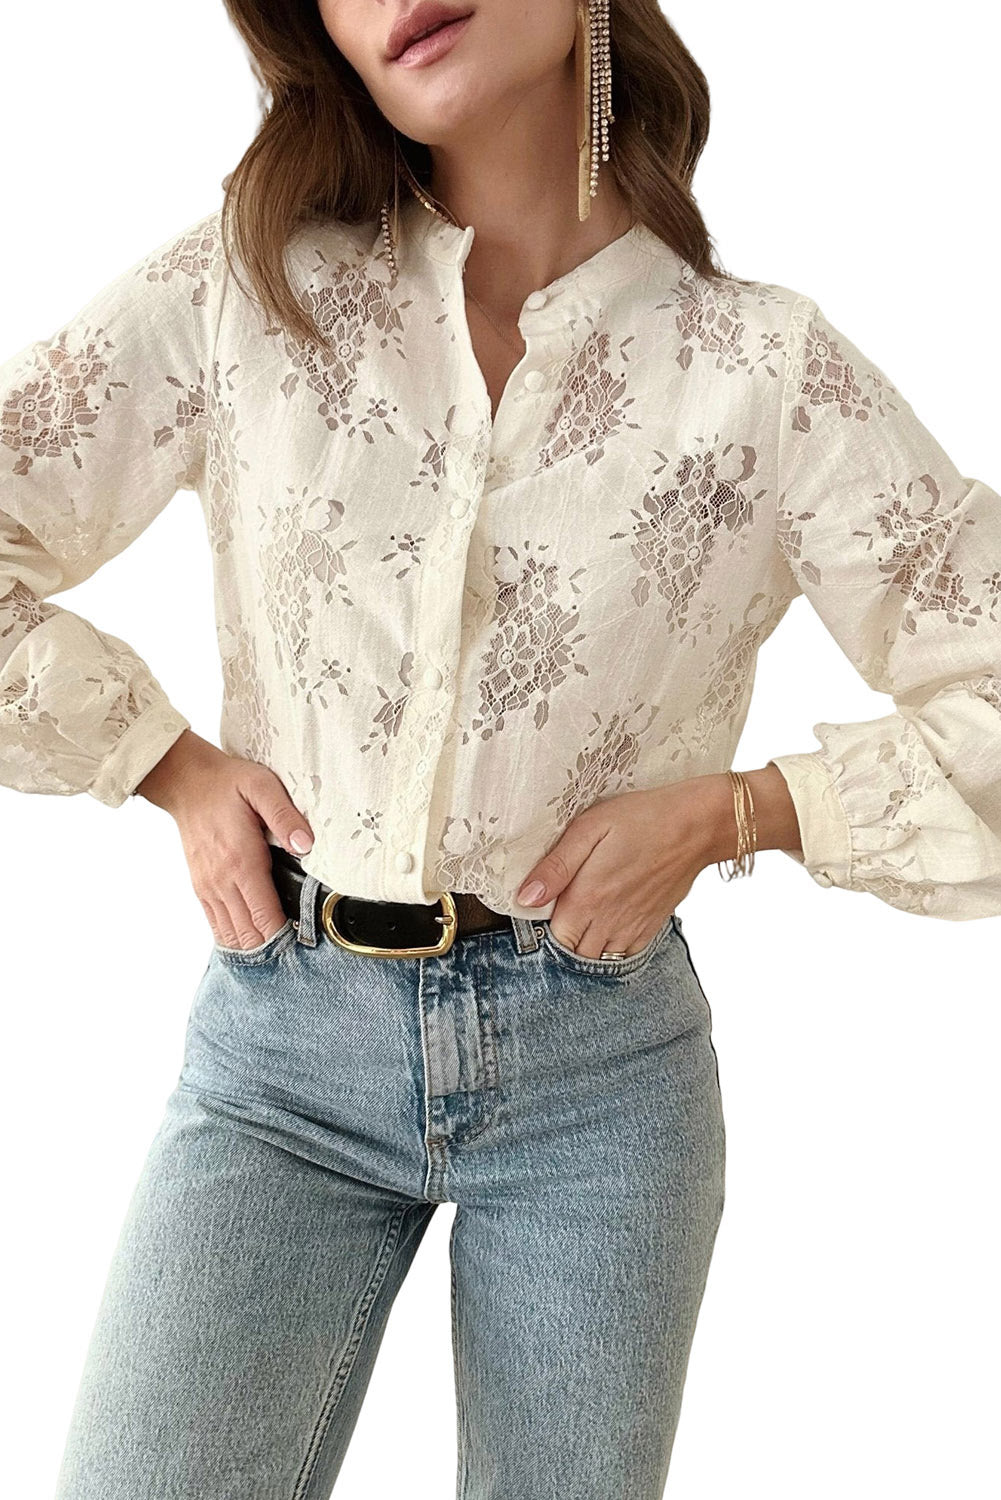 White Floral Lace Stand Neck Textured Shirt-6